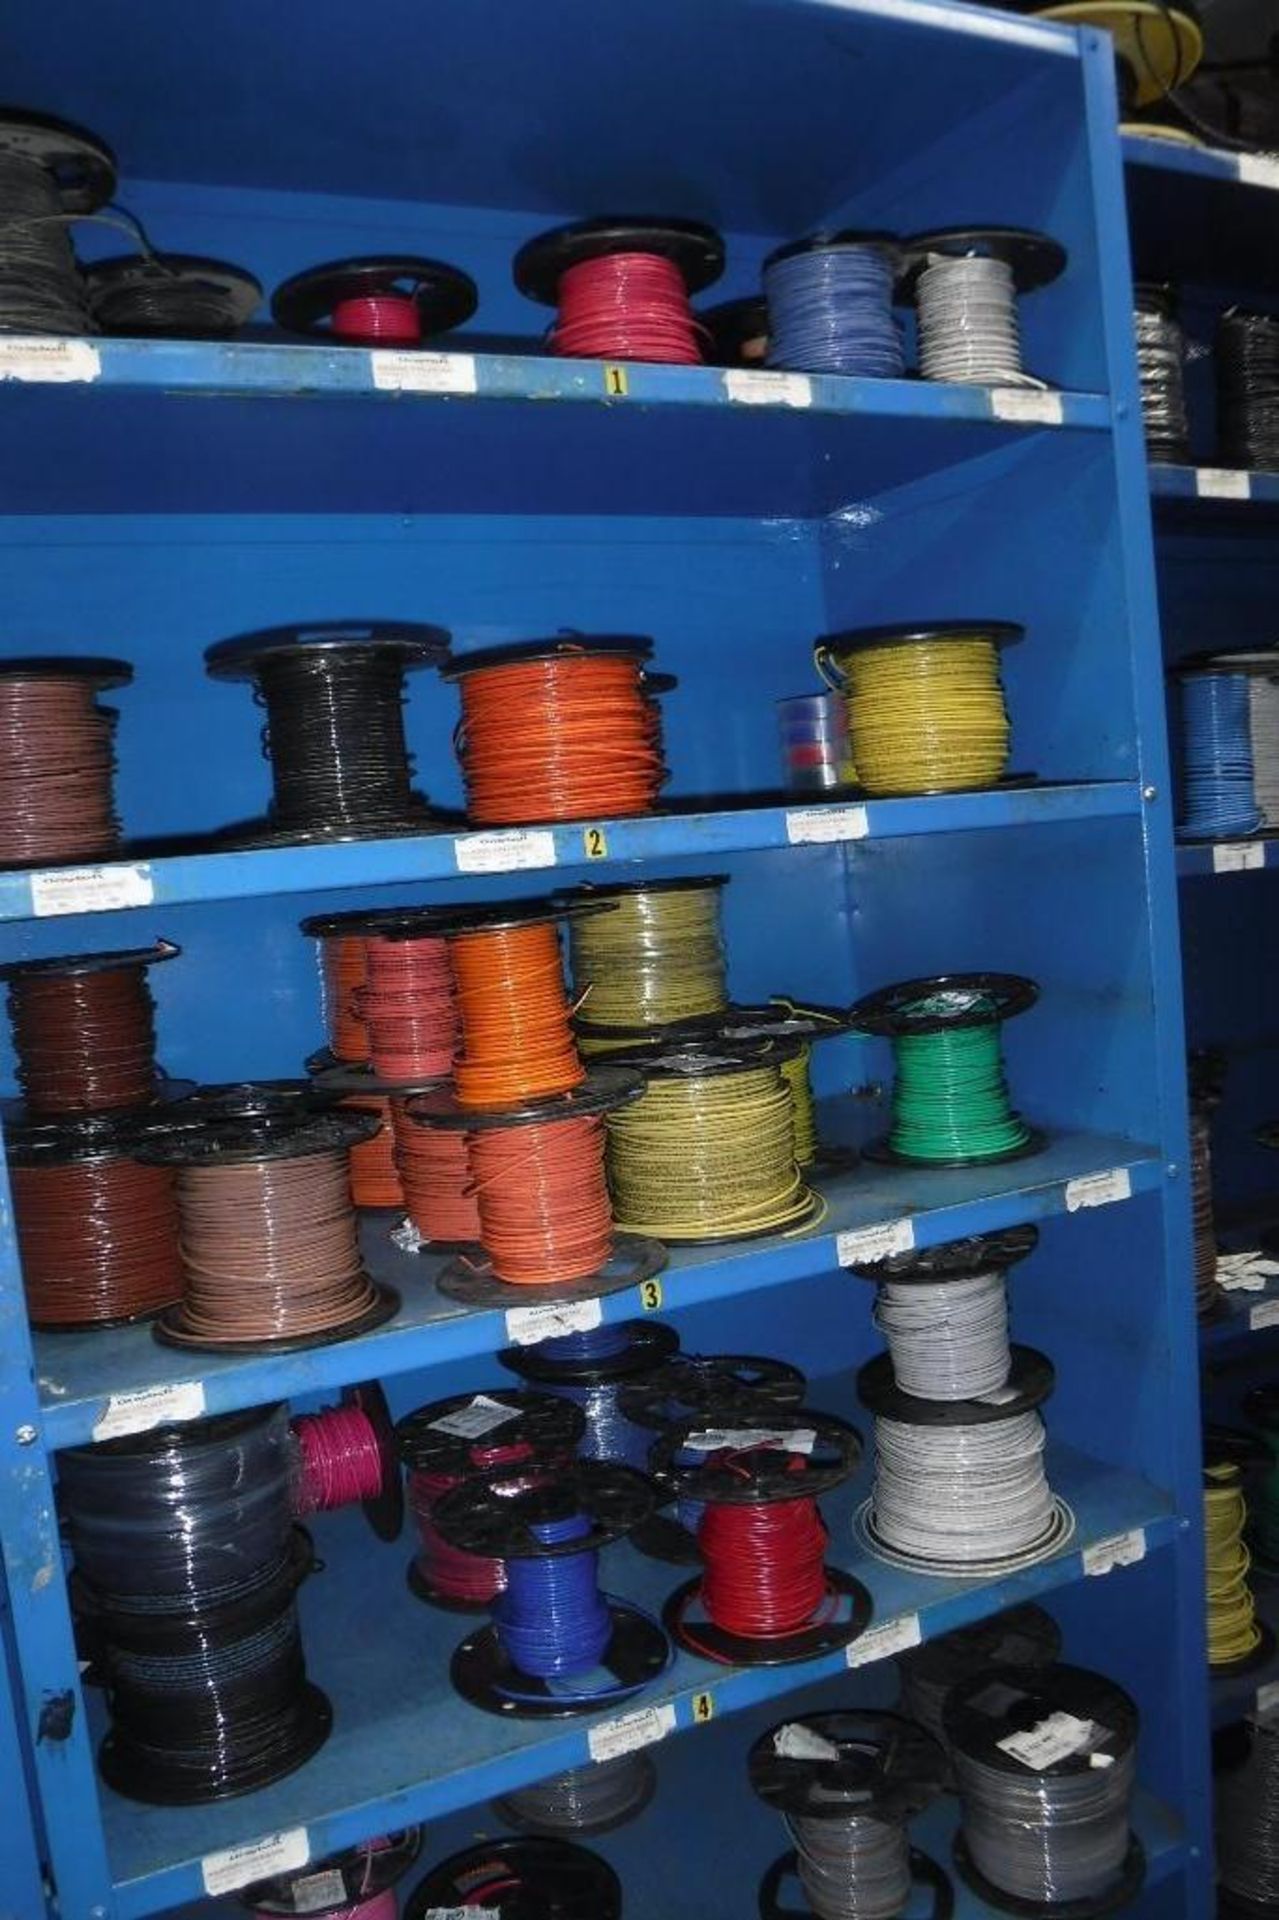 Contents of Rack 080S-Spools of Wire, MUST REMOVE BY 2/14/20-MUST BE REMOVED IN THE ENTIRITY